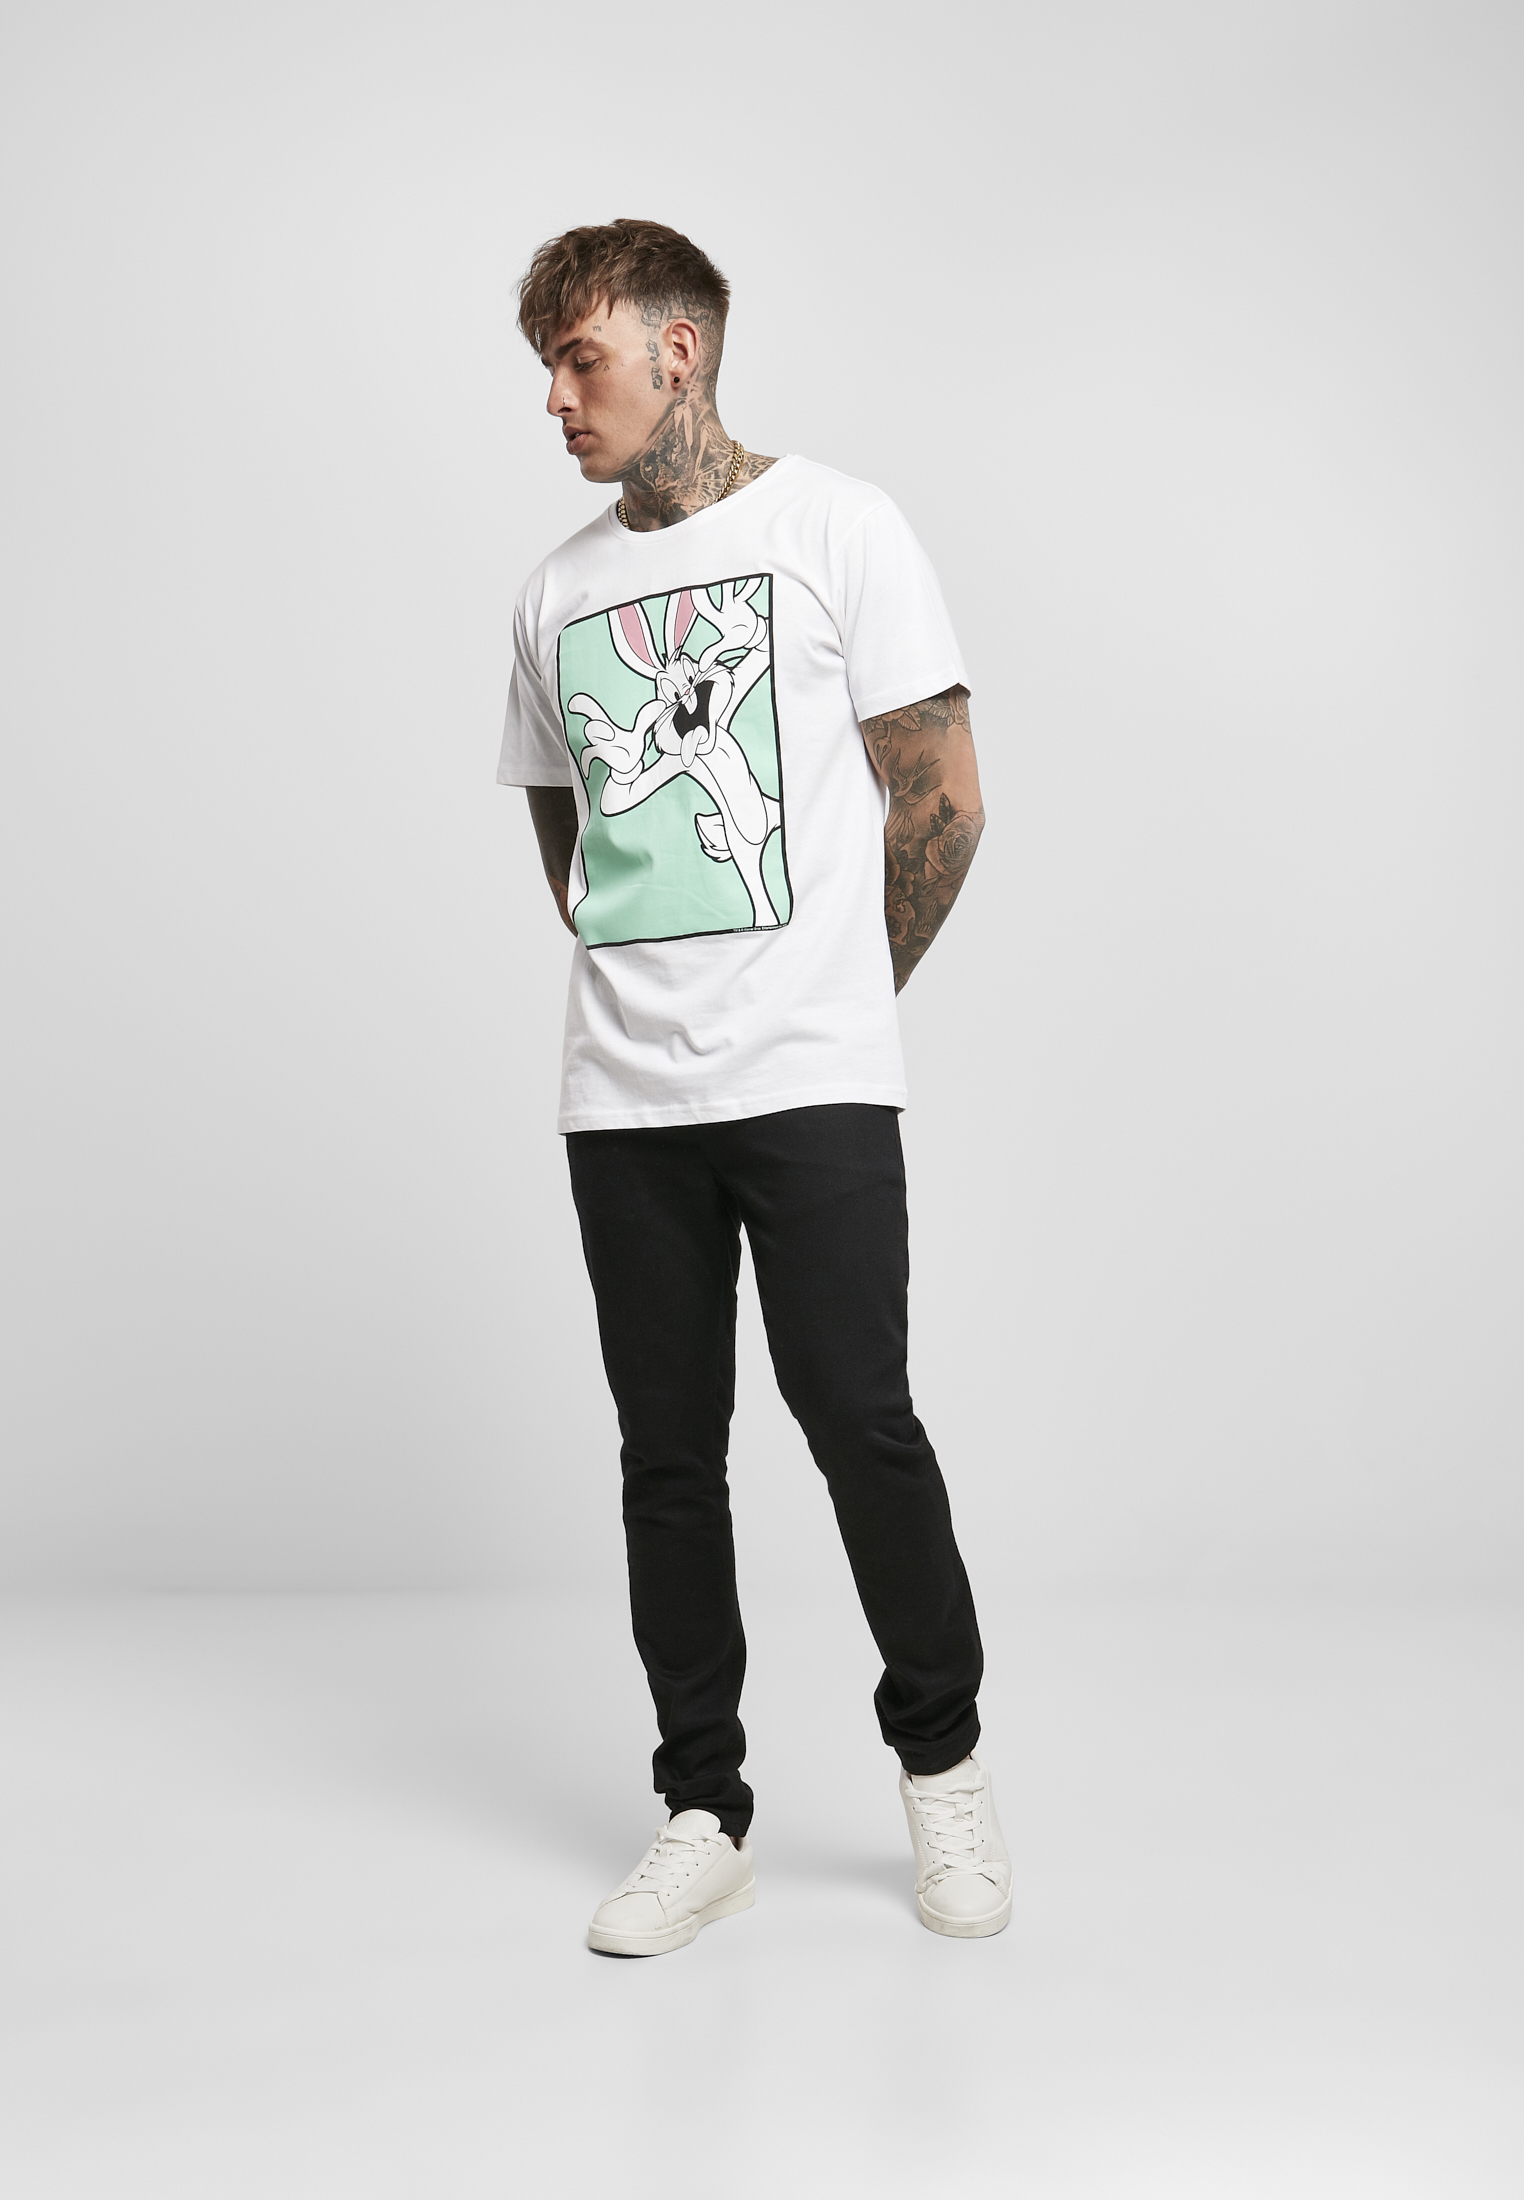 Merchcode T-Shirt Looney Tunes Bugs Bunny Funny Face Tee White